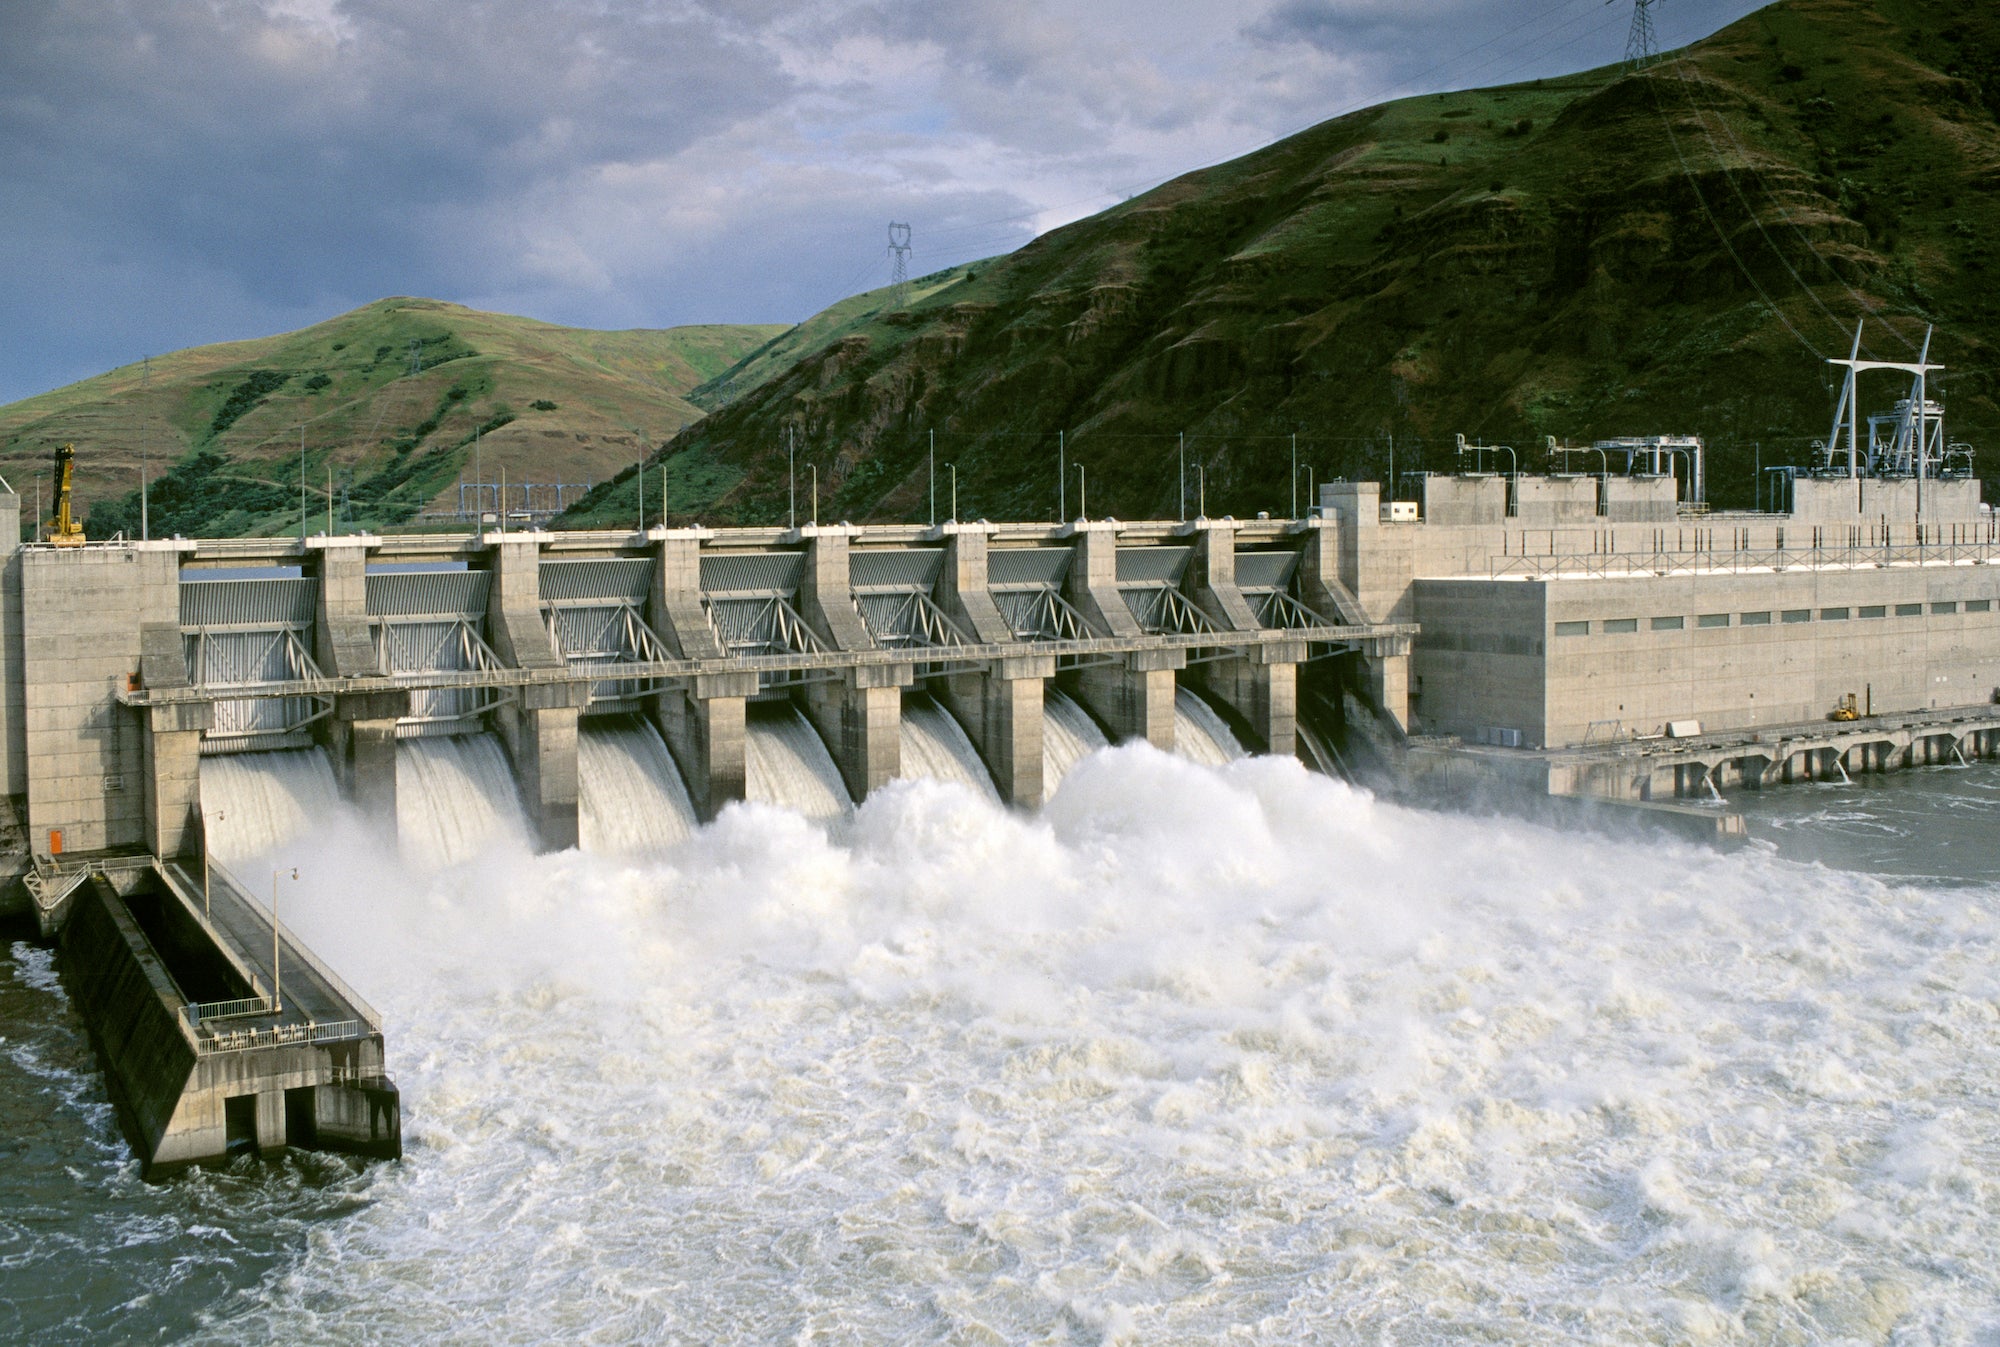 Lower Granite Dam is the uppermost of the Lower Four Snake River Dams. It sits 40 miles downstream of Lewiston, Idaho.